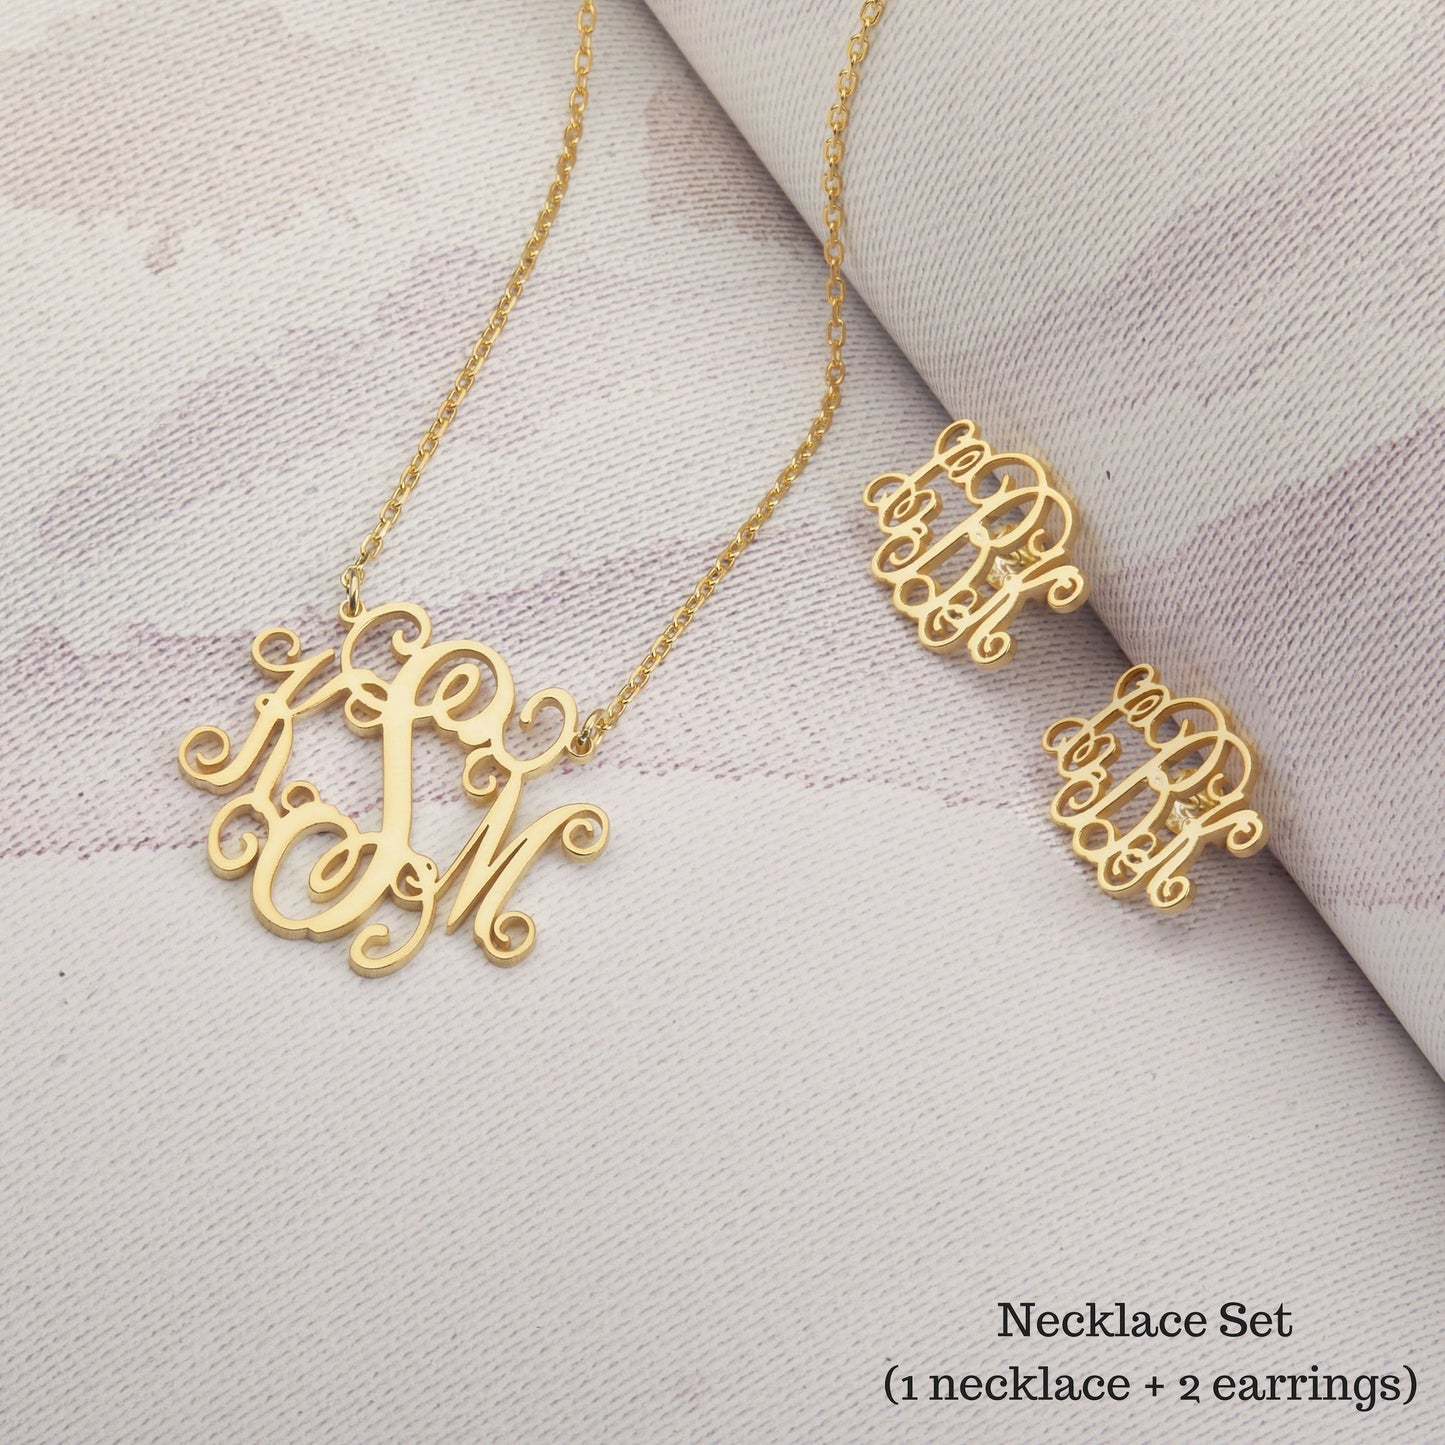 Custom Monogram Necklace | Name Initials Necklace | Monogrammed Necklace | Monogram Earrings | Children Name Necklace | Gift for mom